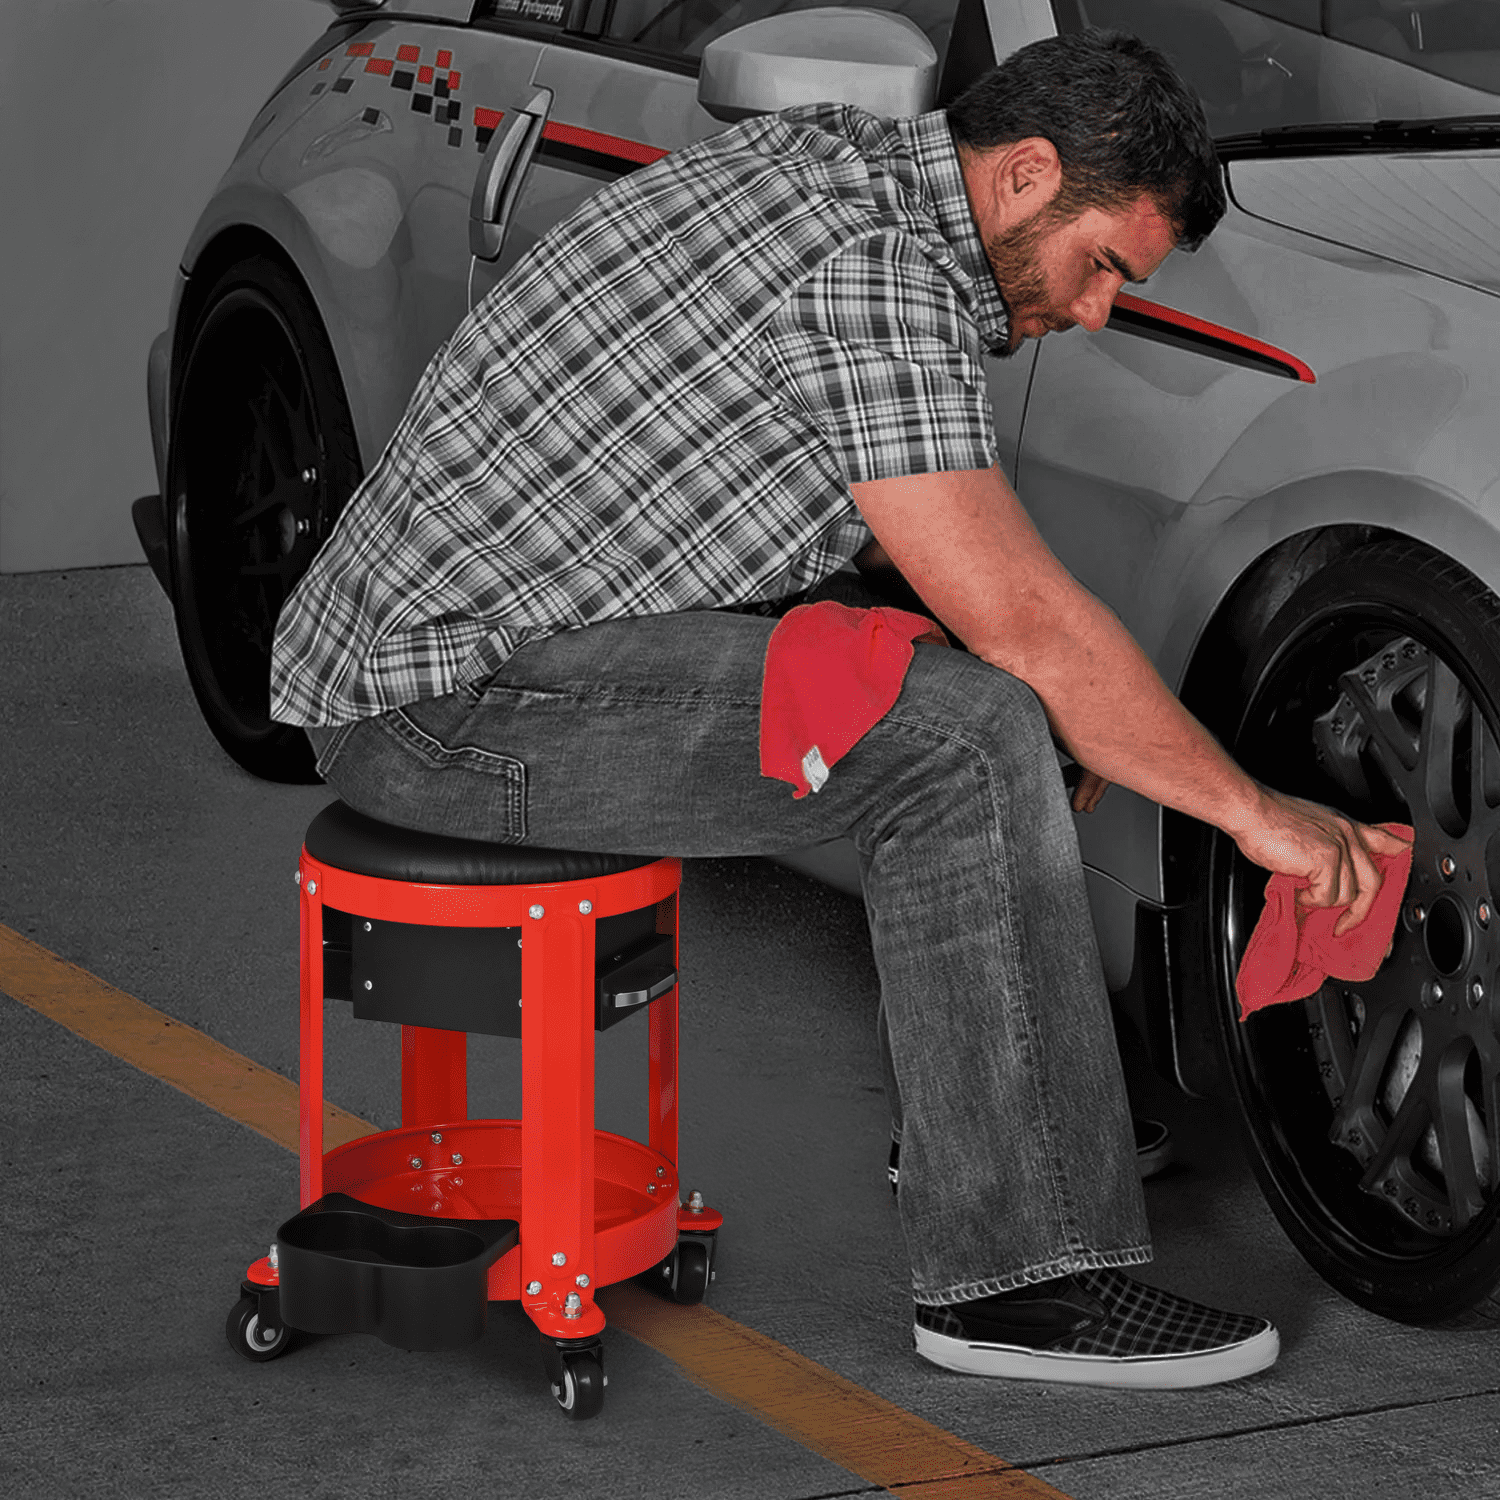 VEVOR Mechanics Stool 300 lbs. Capacity Rolling Creeper Seat with 4 in. Wheels with 3 Slide Out Tool Trays and Drawer Roller